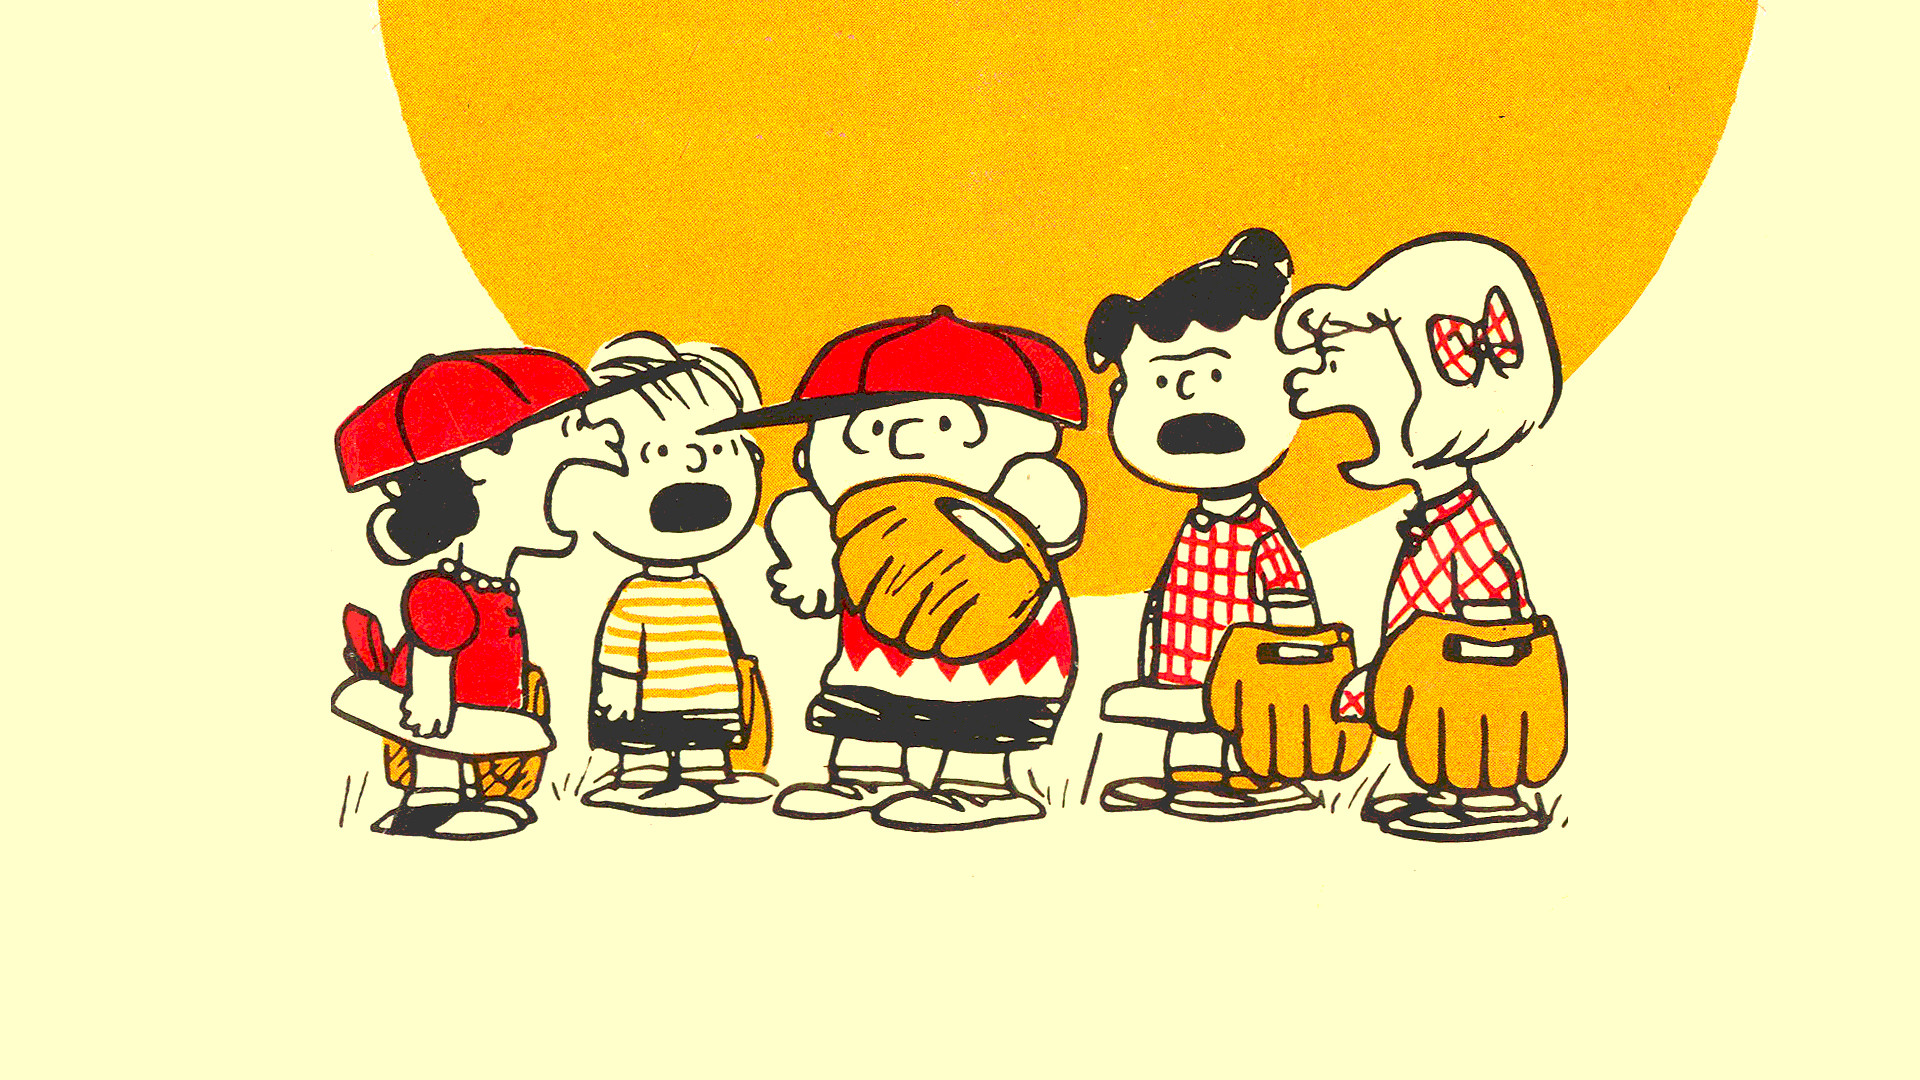 1920x1080 Satisfyingly minimal, warm, easy-on-the-eyes 1080x1920 wallpaper - "Kill  yourself, Charlie Brown" ...